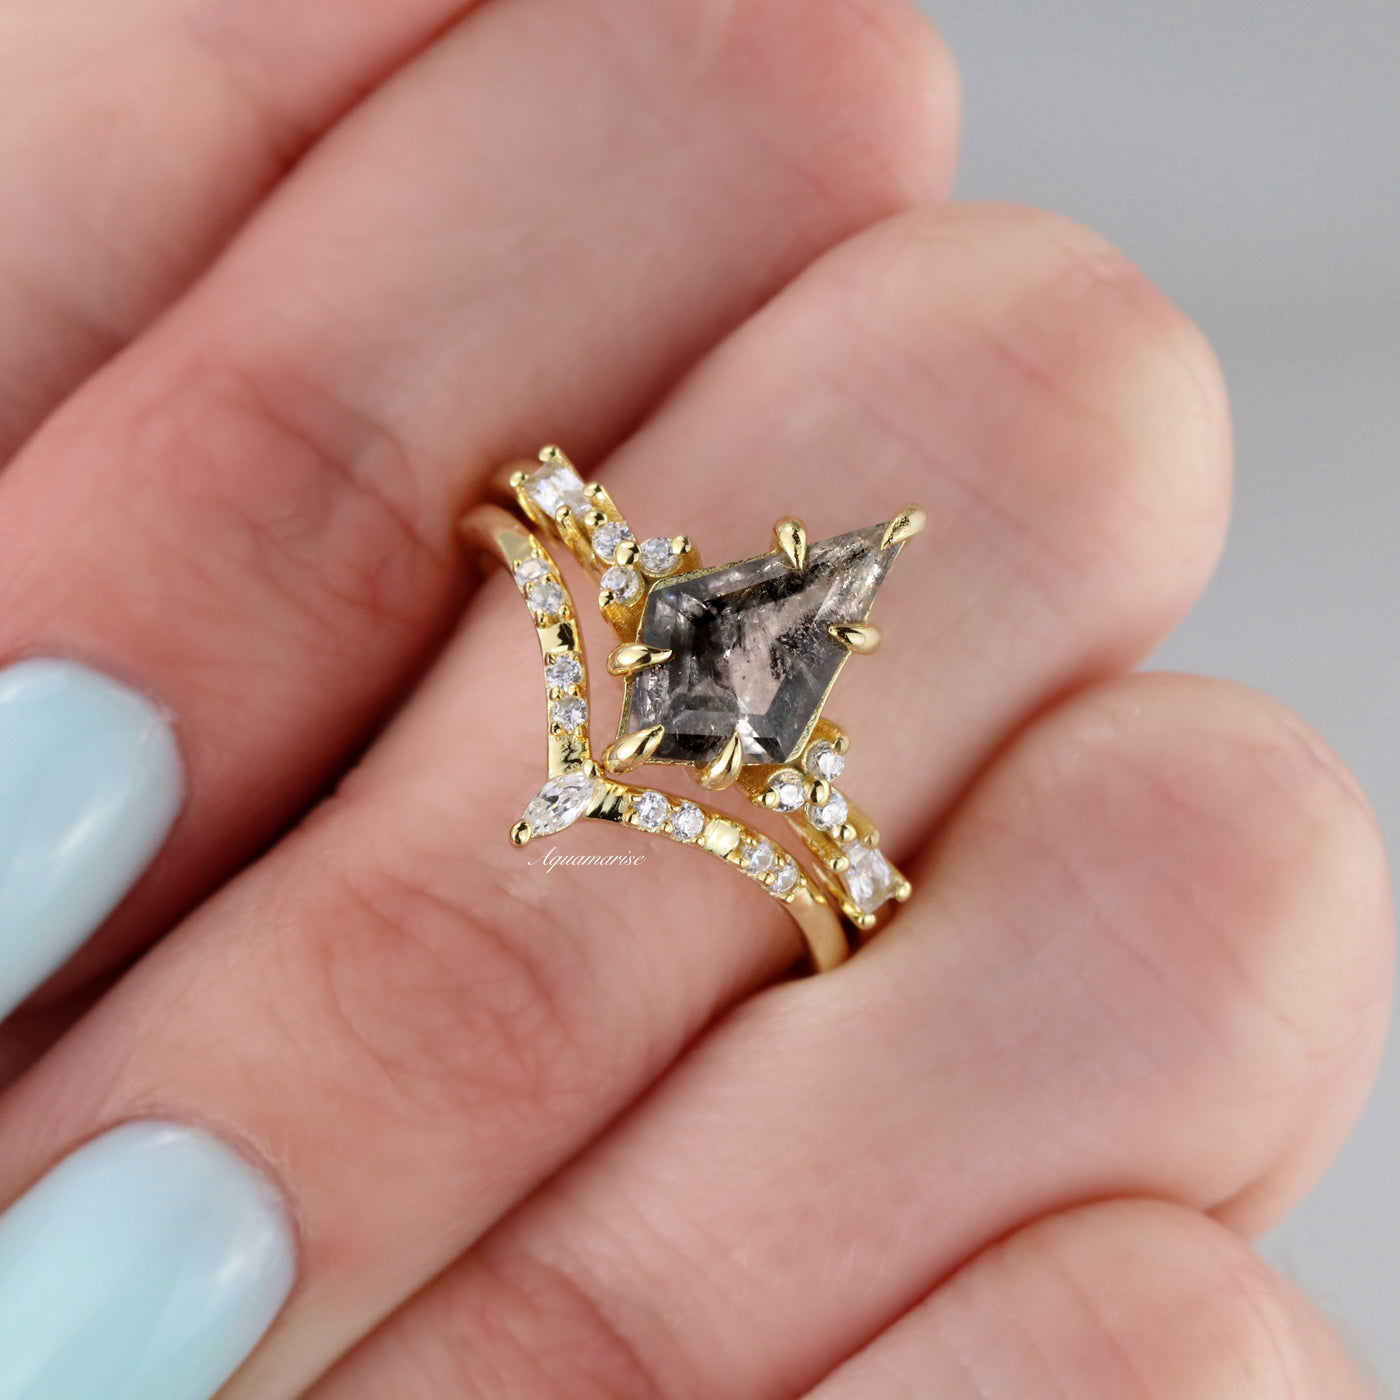 Galaxy Raw Salt and Pepper Diamond Ring Set For Women- Unique Kite Engagement Ring Geometric Diamond Promise Ring- 14K Yellow Gold Vermeil